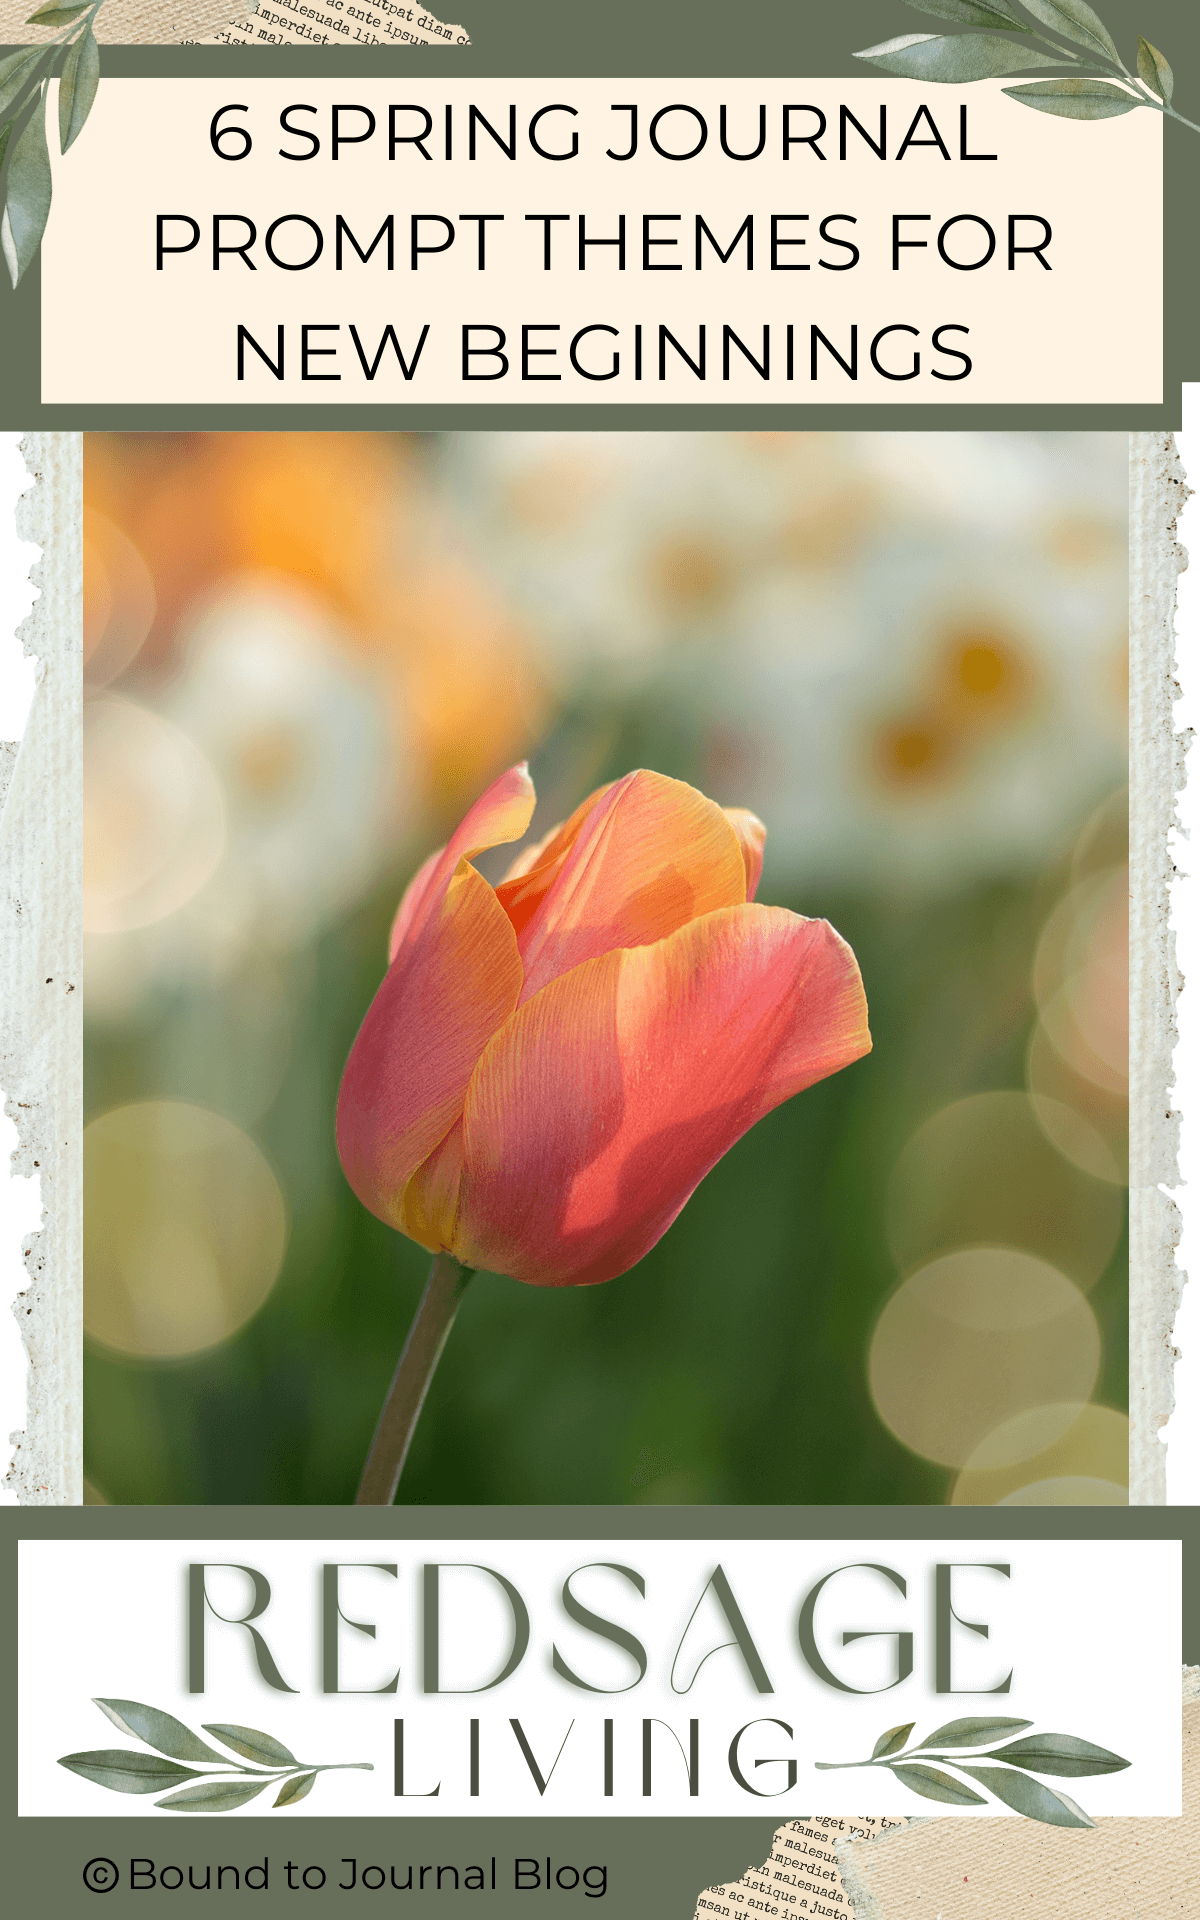 Peach colored tulip with blurred greens in the background for post titled 6 Spring Journal Prompt Themes for New Beginnings